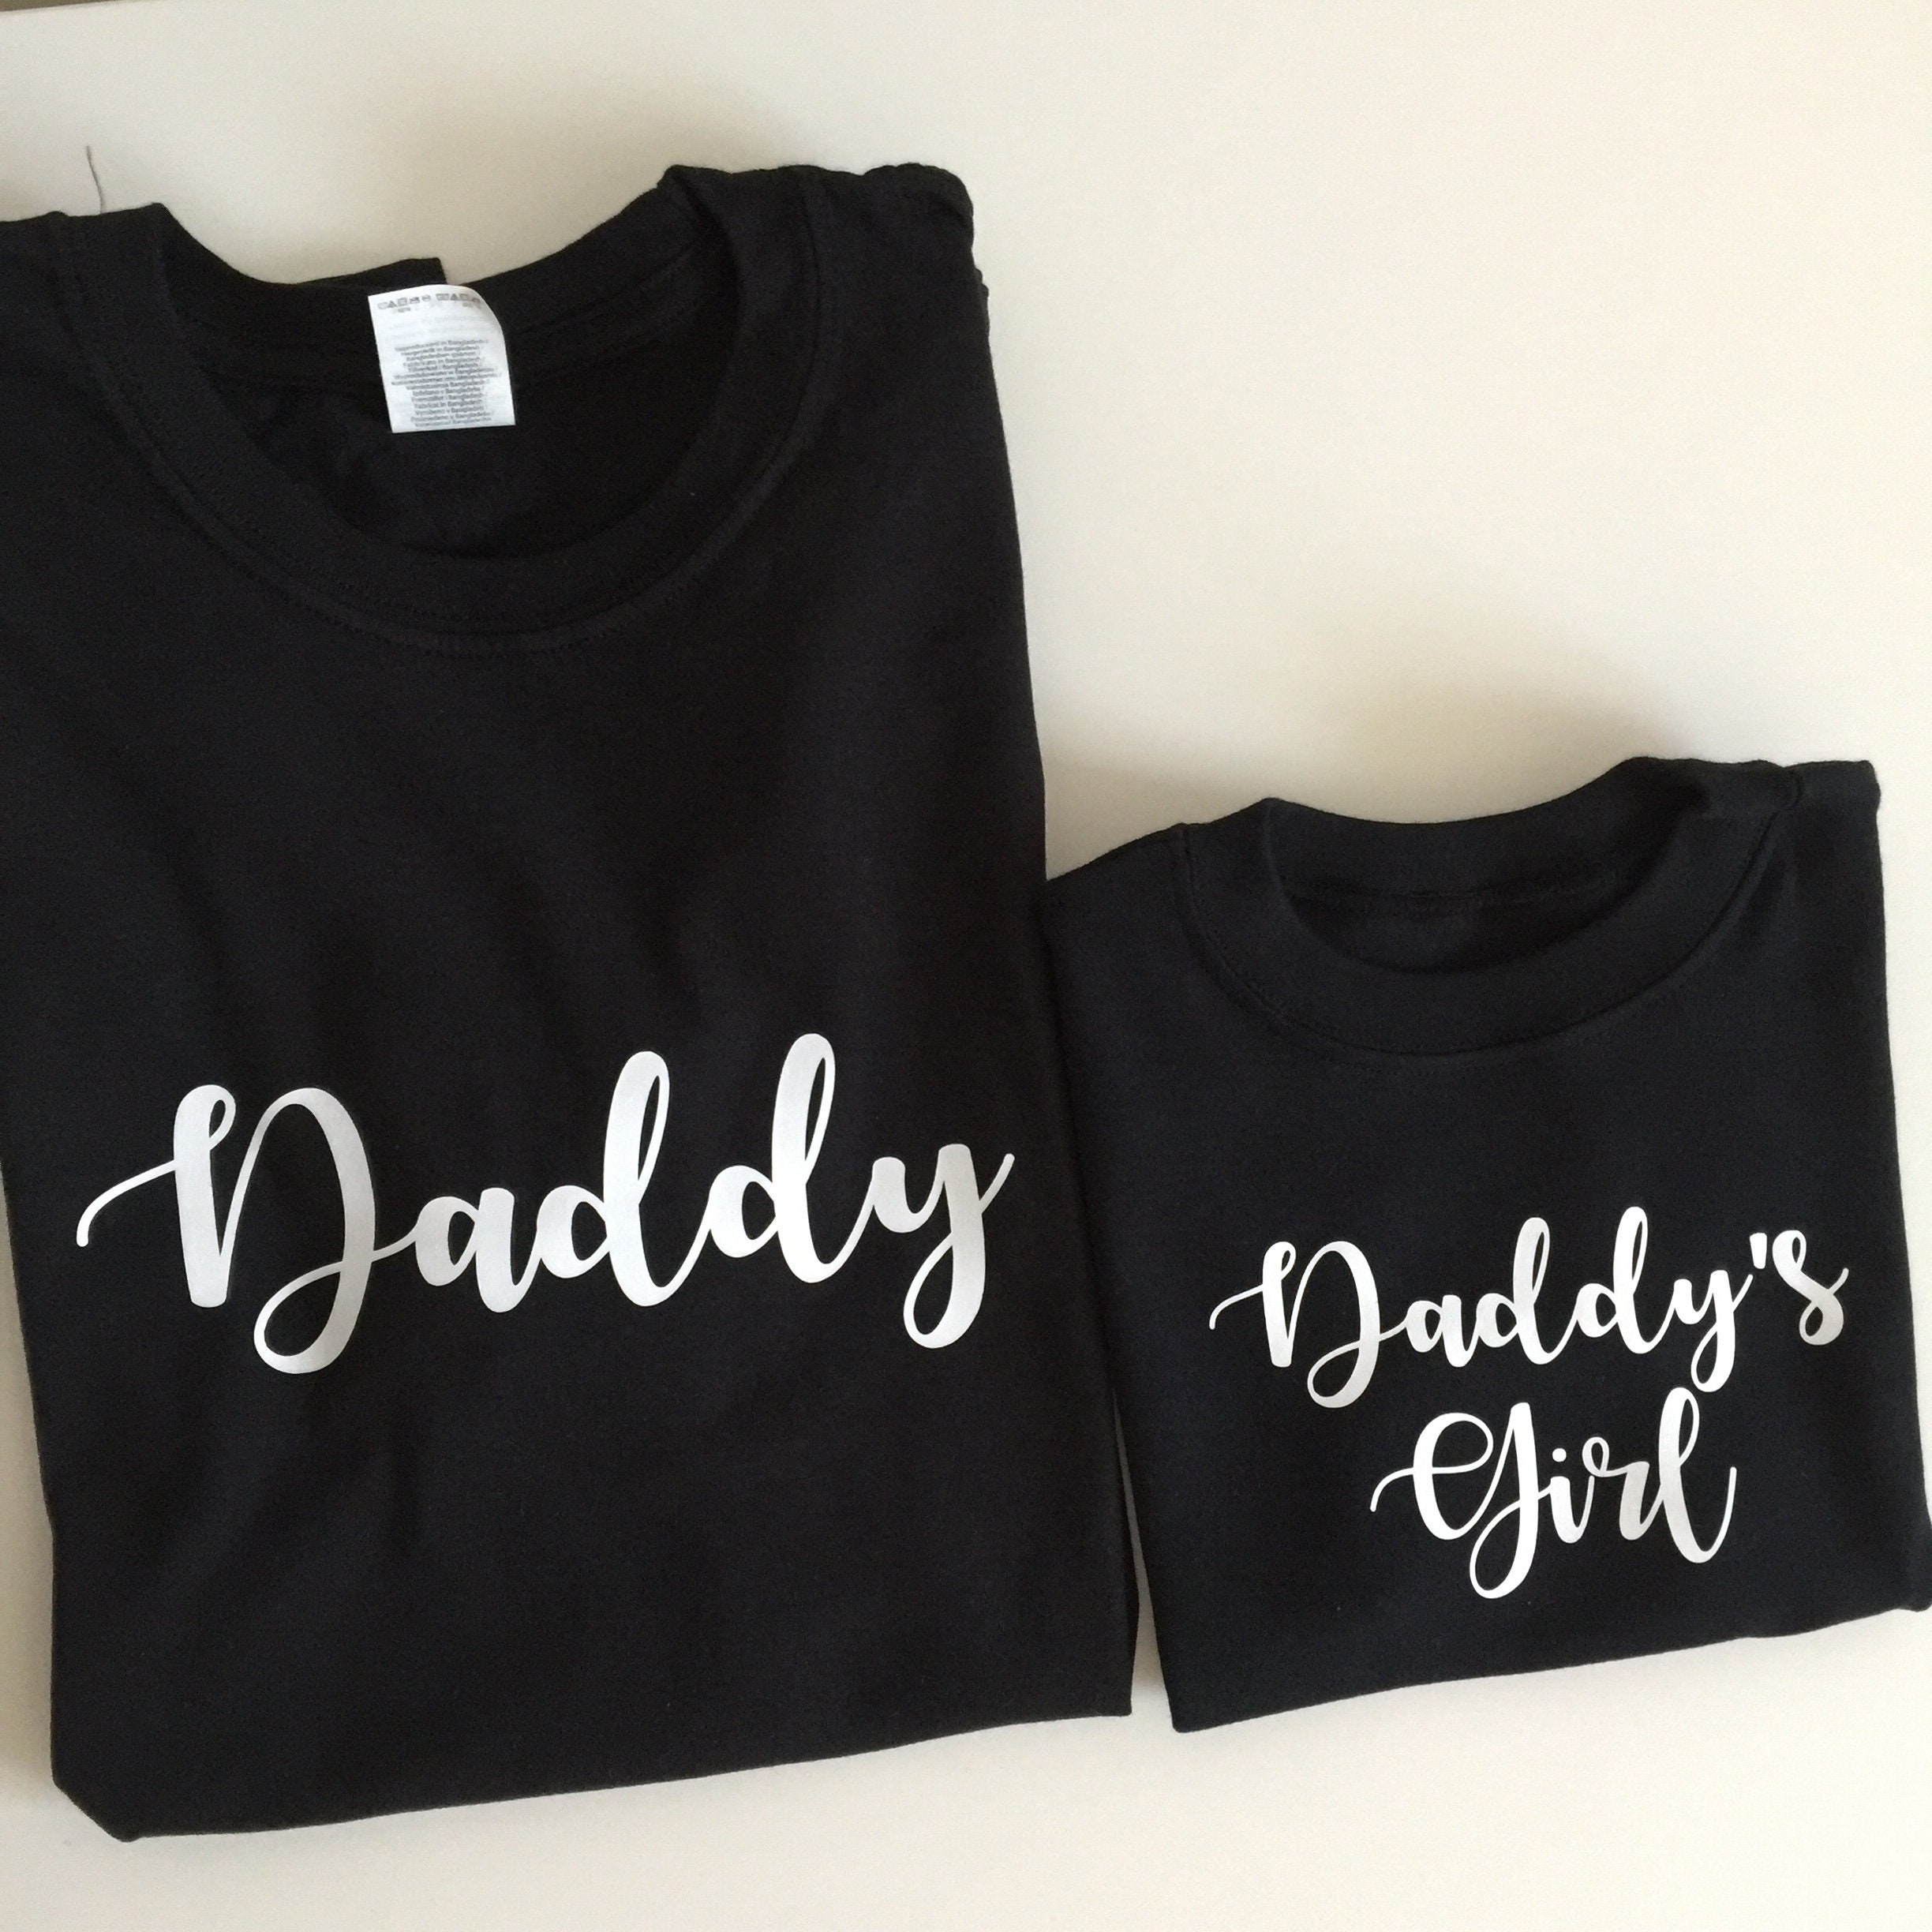 Daddy and daughter t-shirts set Daddy and daddy's girl t-shirts set